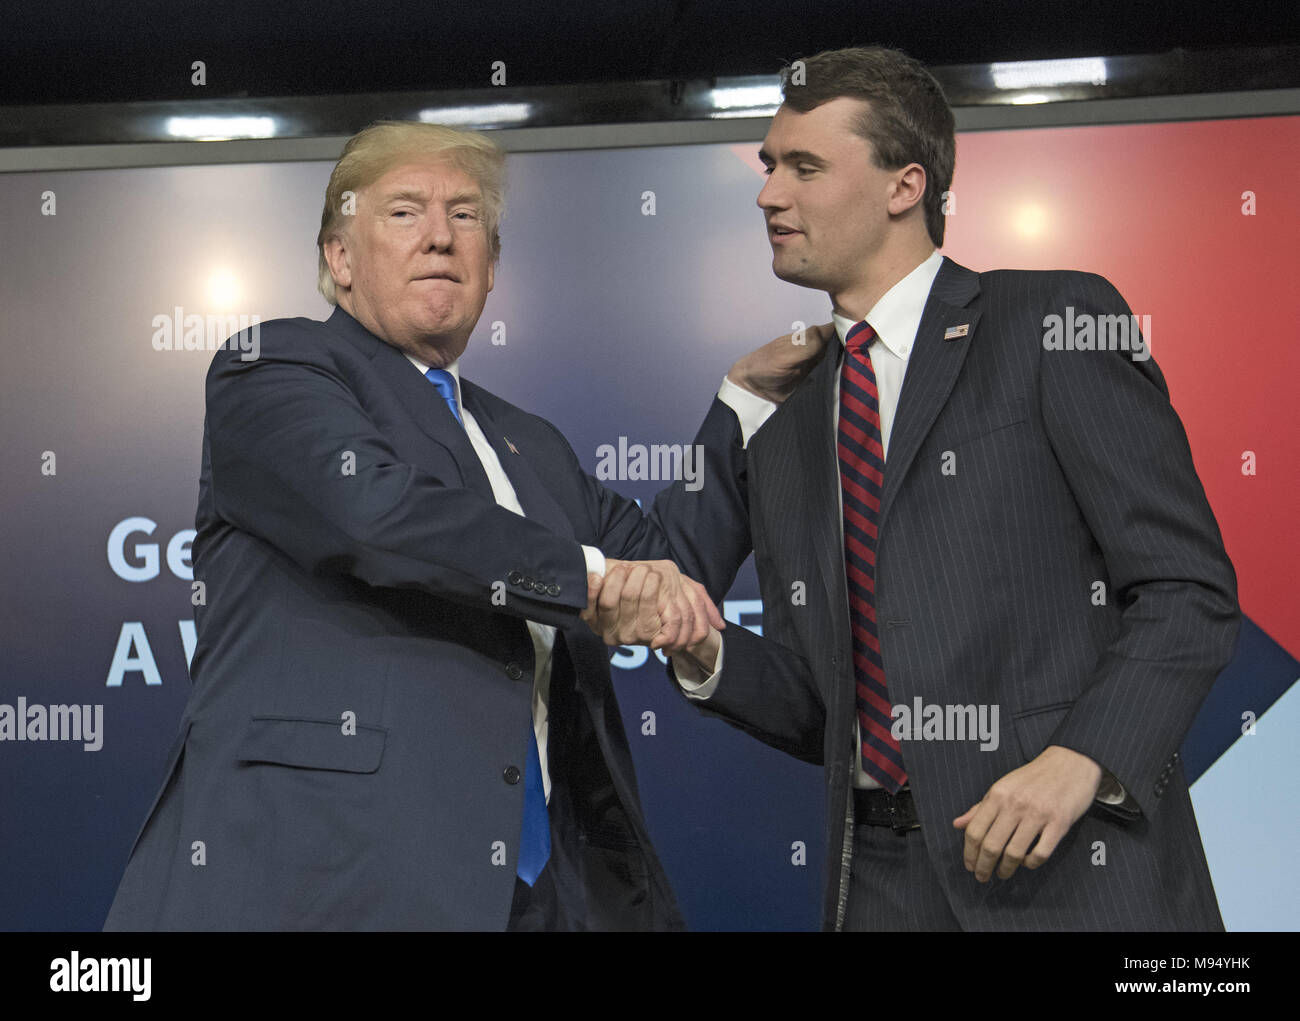 Washington, District of Columbia, USA. 22nd Mar, 2018. United States President Donald J. Trump, left, shakes hands with with Charlie Kirk, Founder and Executive Director of Turning Point USA, right, after participating in a panel discussion, at the Generation Next Summit at the White House in Washington, DC on Thursday, March 22, 2018.Credit: Ron Sachs/CNP Credit: Ron Sachs/CNP/ZUMA Wire/Alamy Live News Stock Photo